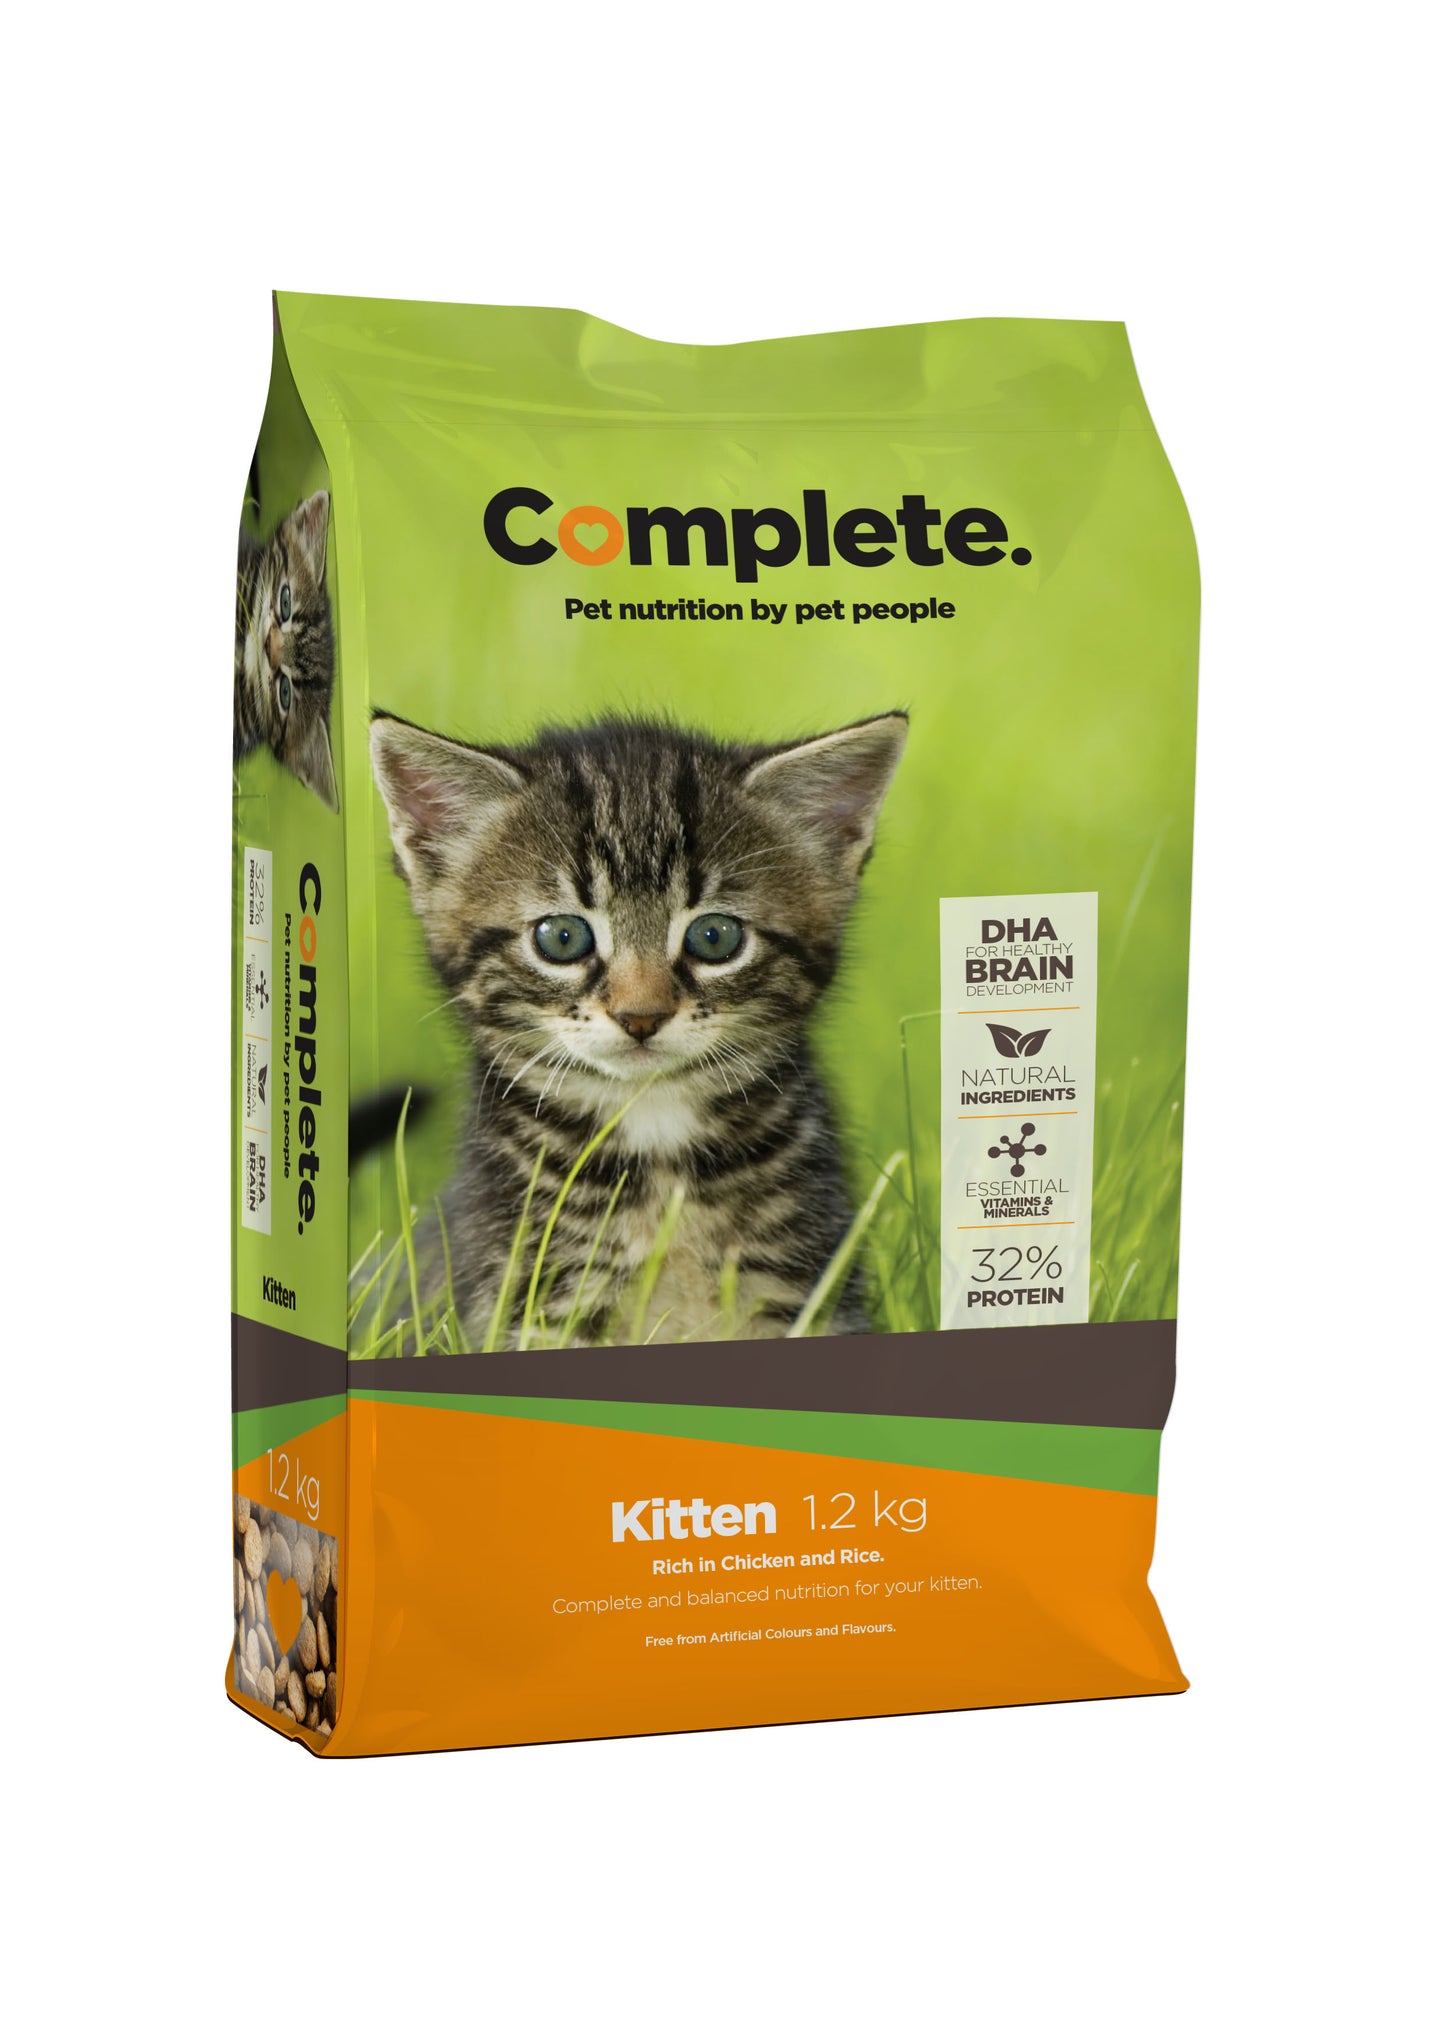 kitten 1.2kg Complete Pet Food For Cats from Pets Planet - South Africa’s No.1 Online Pet Store for premium pet products, best pet store near me, cat food, cat wet food, complete cat food, pet food, dog bed, dog beds, washable dog bed, takealot dog bed, plush dog bed, Complete Pet Nutrition, Complete pet nutrition cat food, hills dog food, optimizor dog food, royal canin dog food, jock dog food, bobtail dog food, canine cuisine, acana dog food, best dog food, dog food near me, best dog food brands